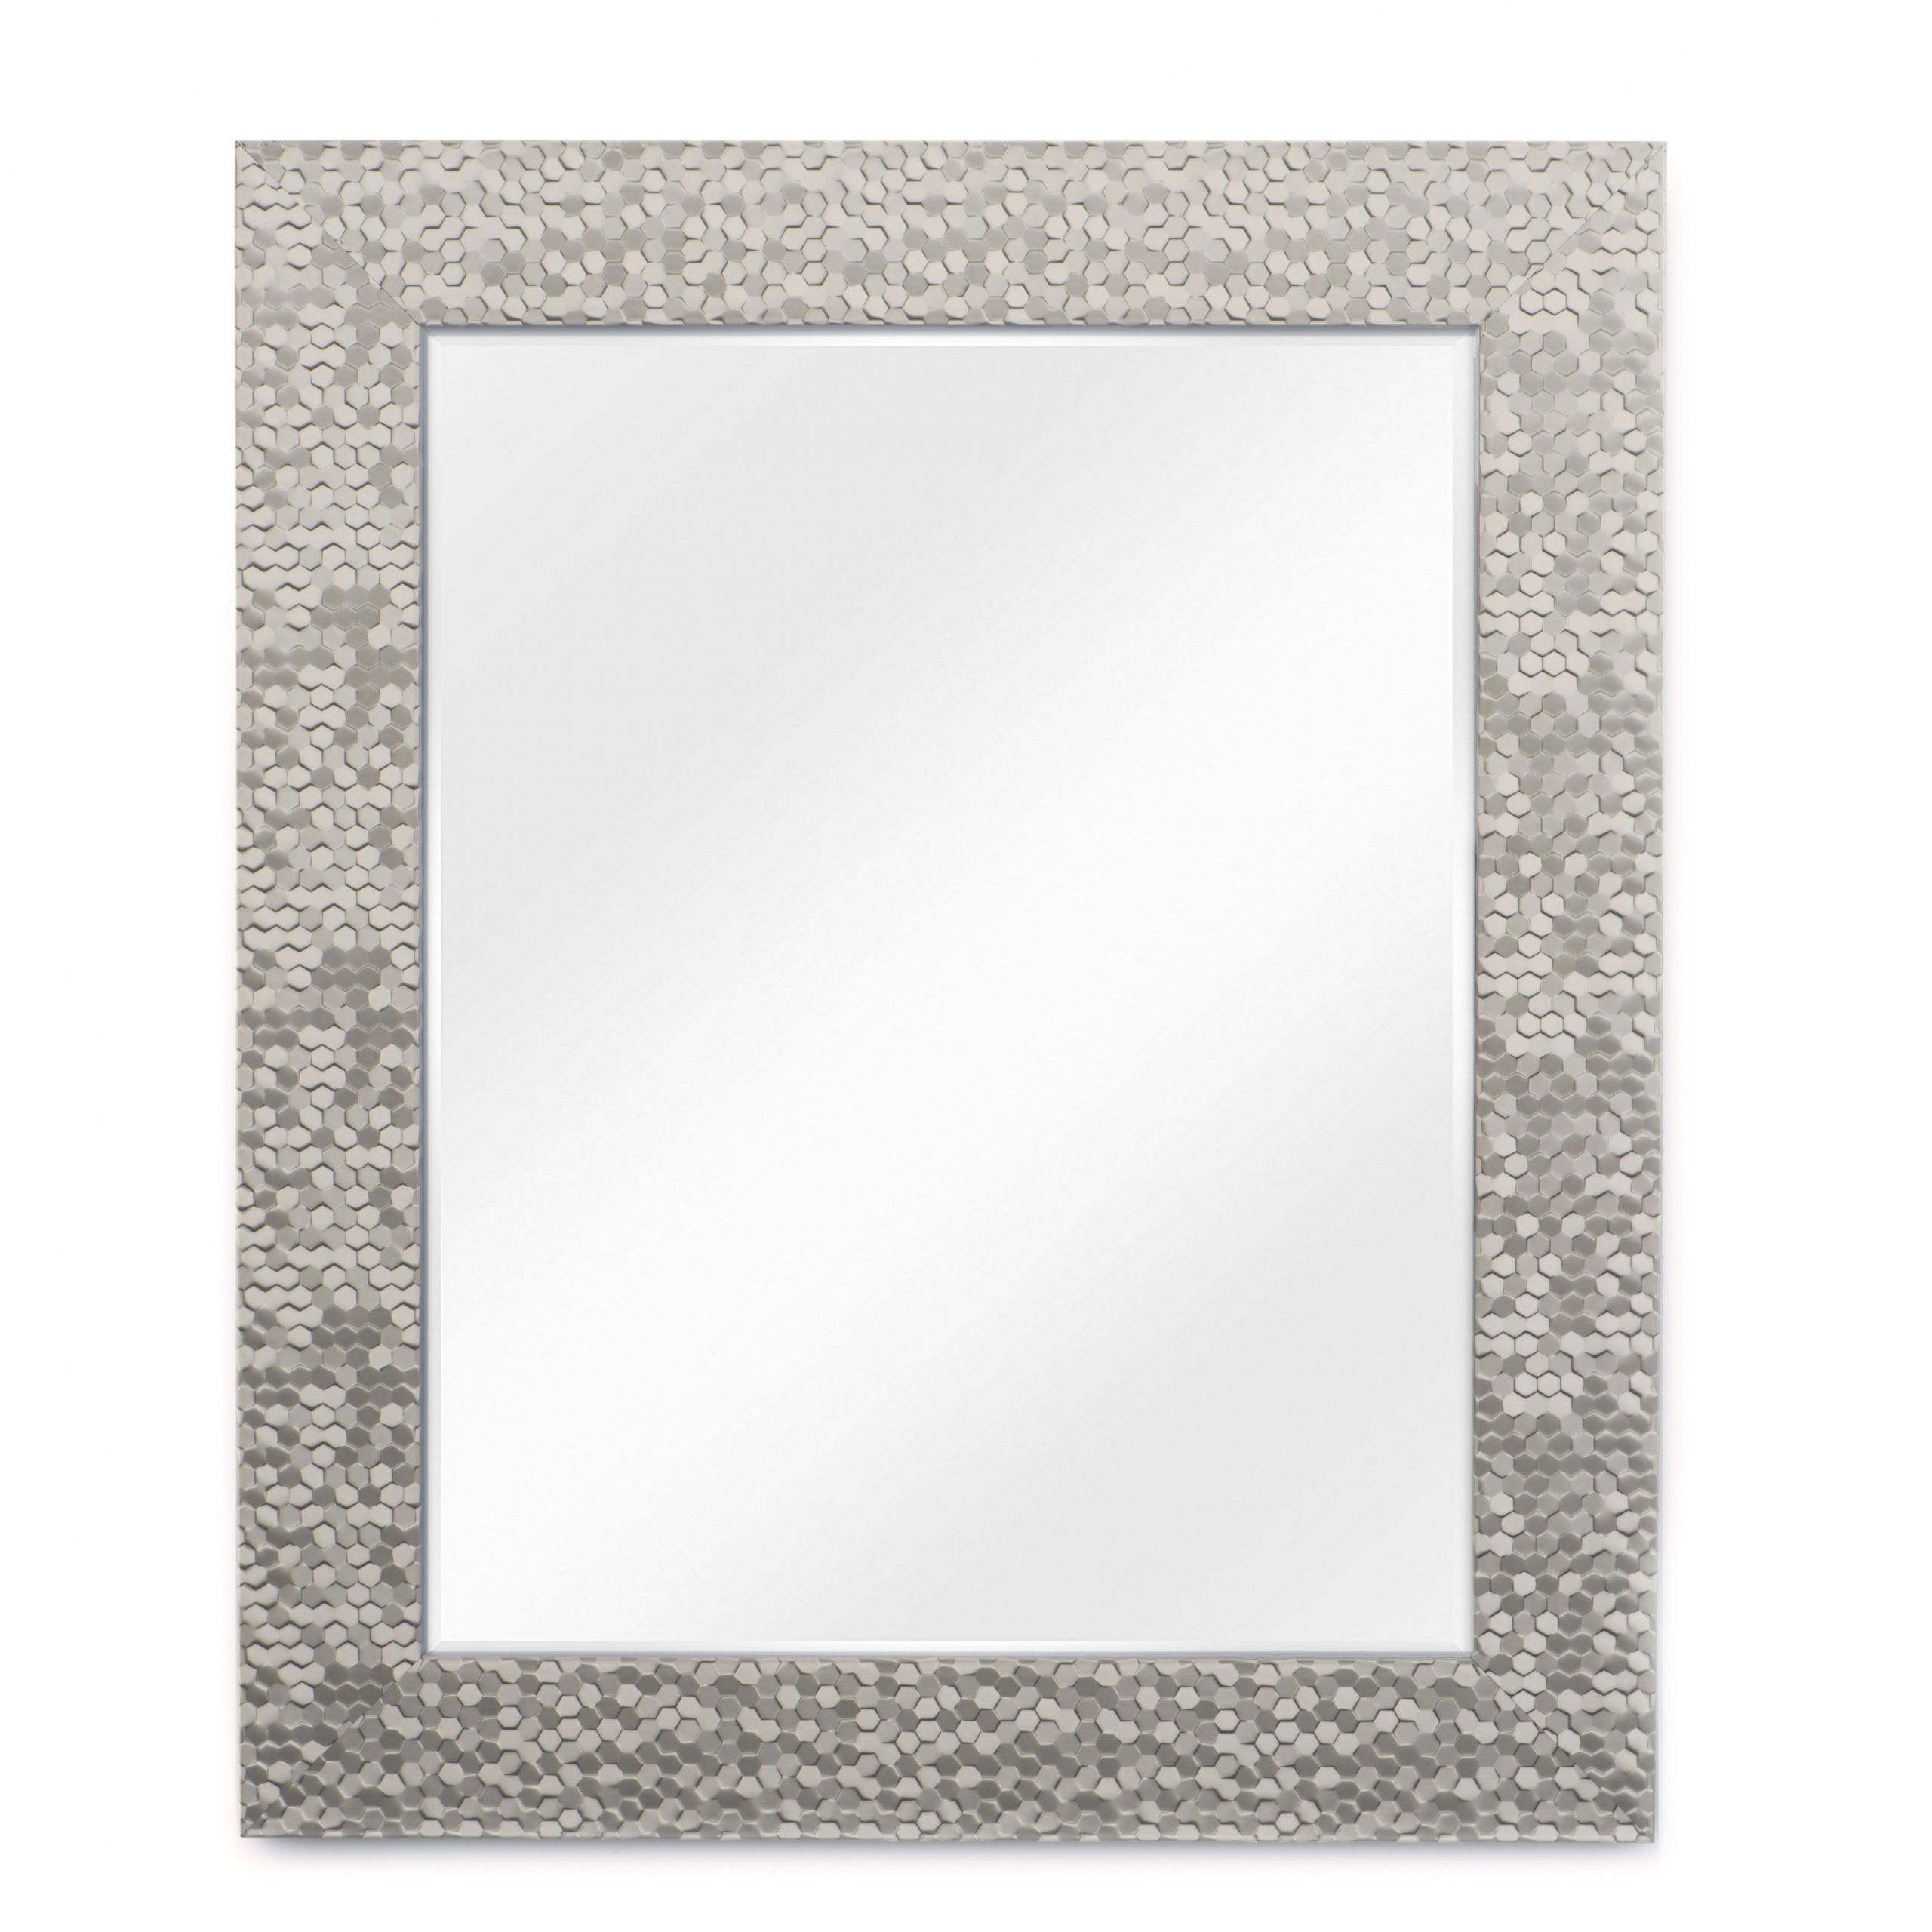 Current Brushed Nickel Octagon Mirrors In Wall Mirror For Bathroom Or Vanity , 21x25 Brushed Nickel – Walmart (View 11 of 15)